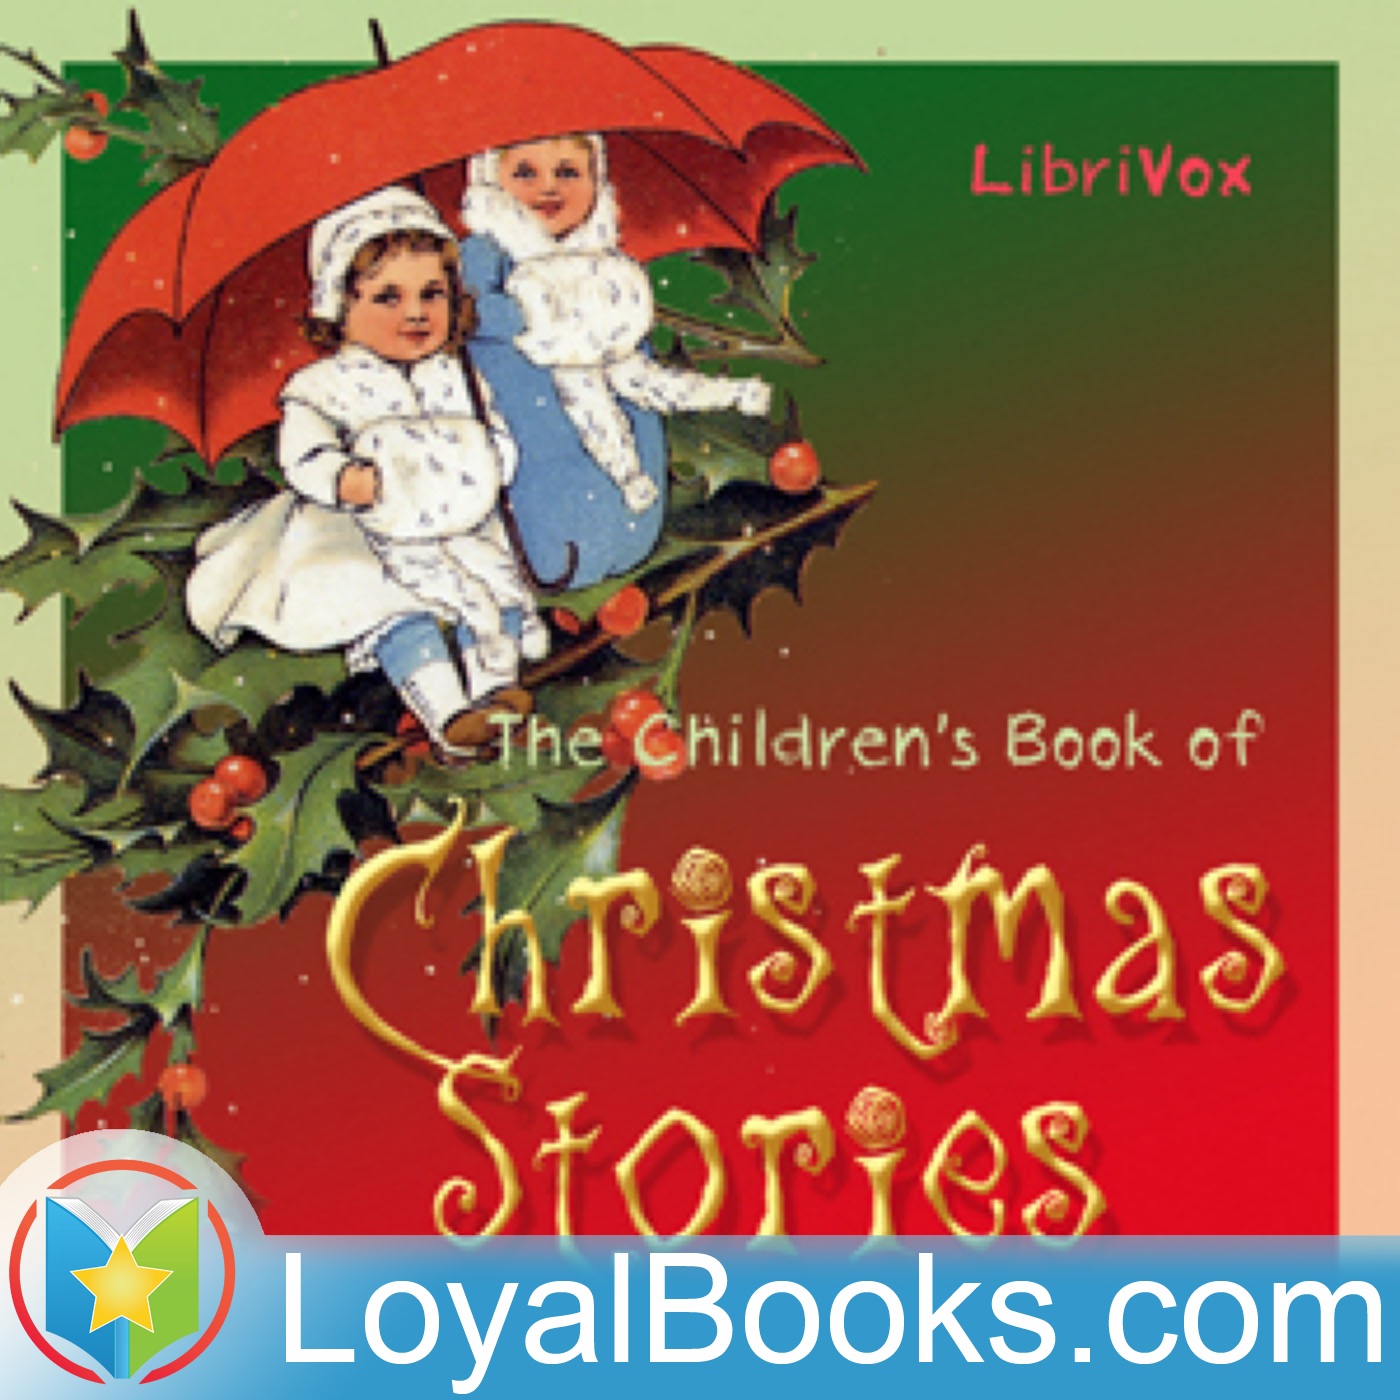 The Children's Book of Christmas Stories by Asa Don Dickinson